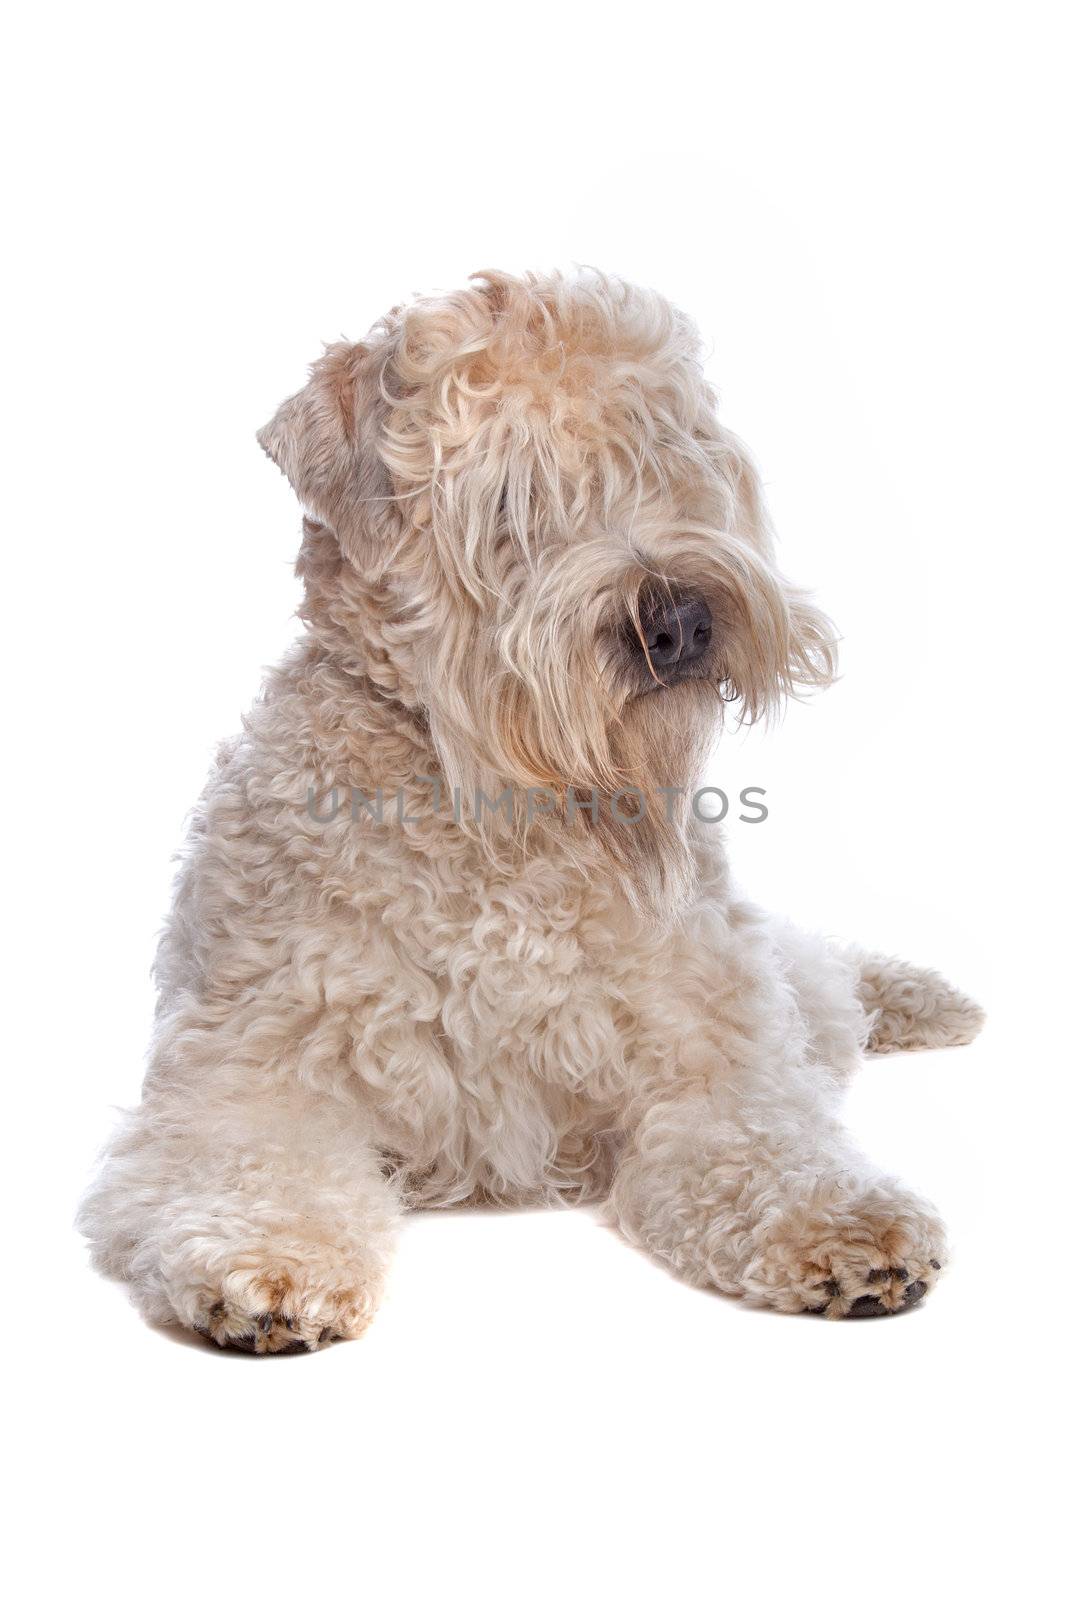 Soft Coated Wheaten Terrier dog isolated on a white background